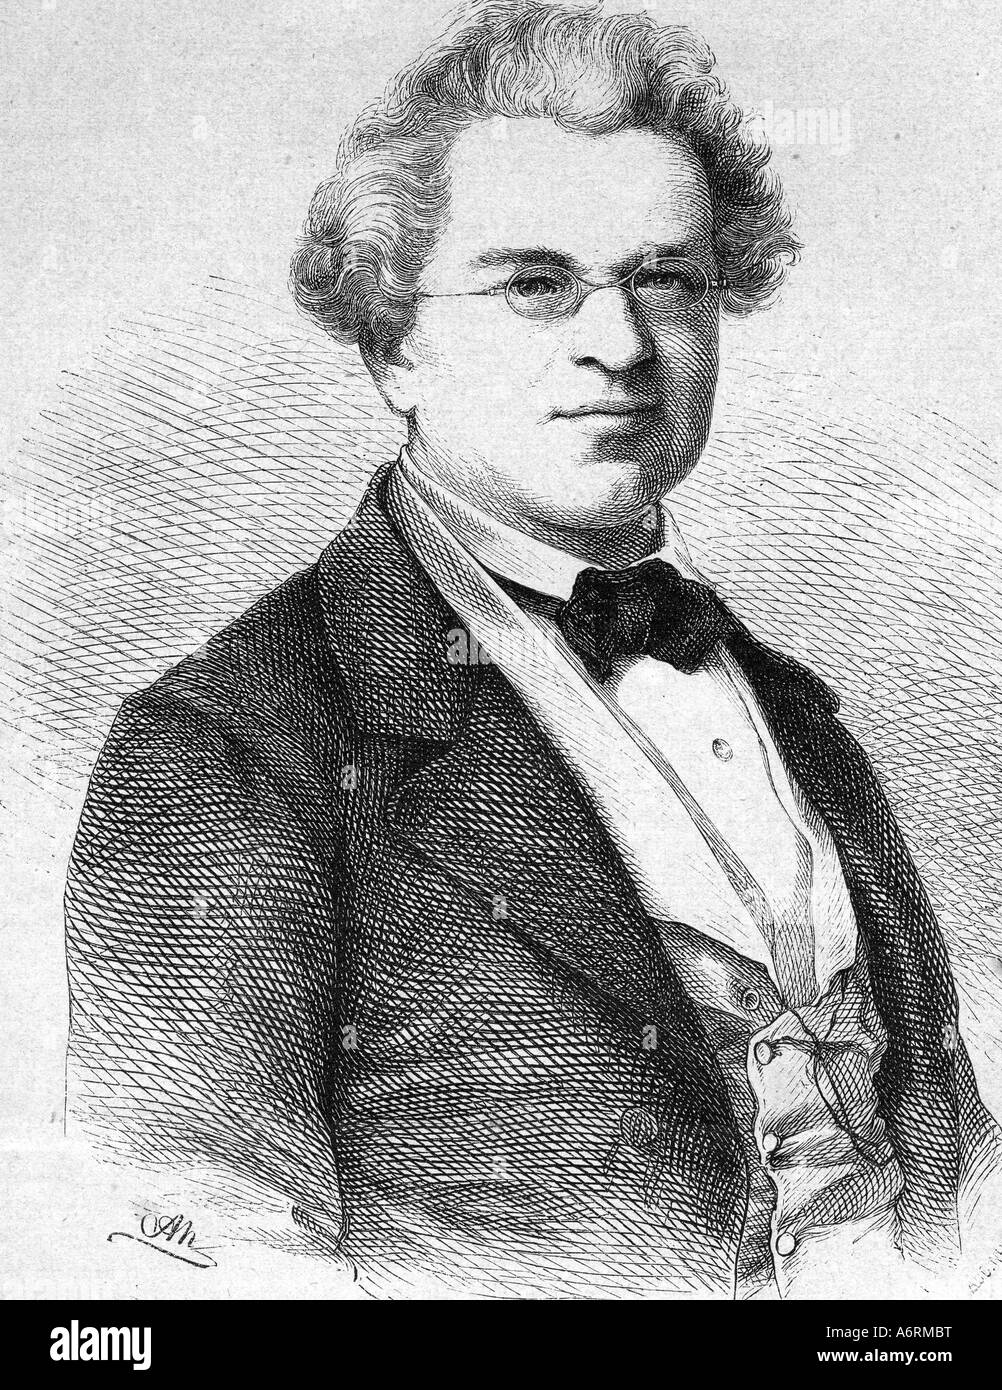 Zimmermann, Wilhelm, 2.1.1807 - 22.9.1878, German historian, theologian and author/writer, engraving by Alfred Neumann (1825 - 1 Stock Photo